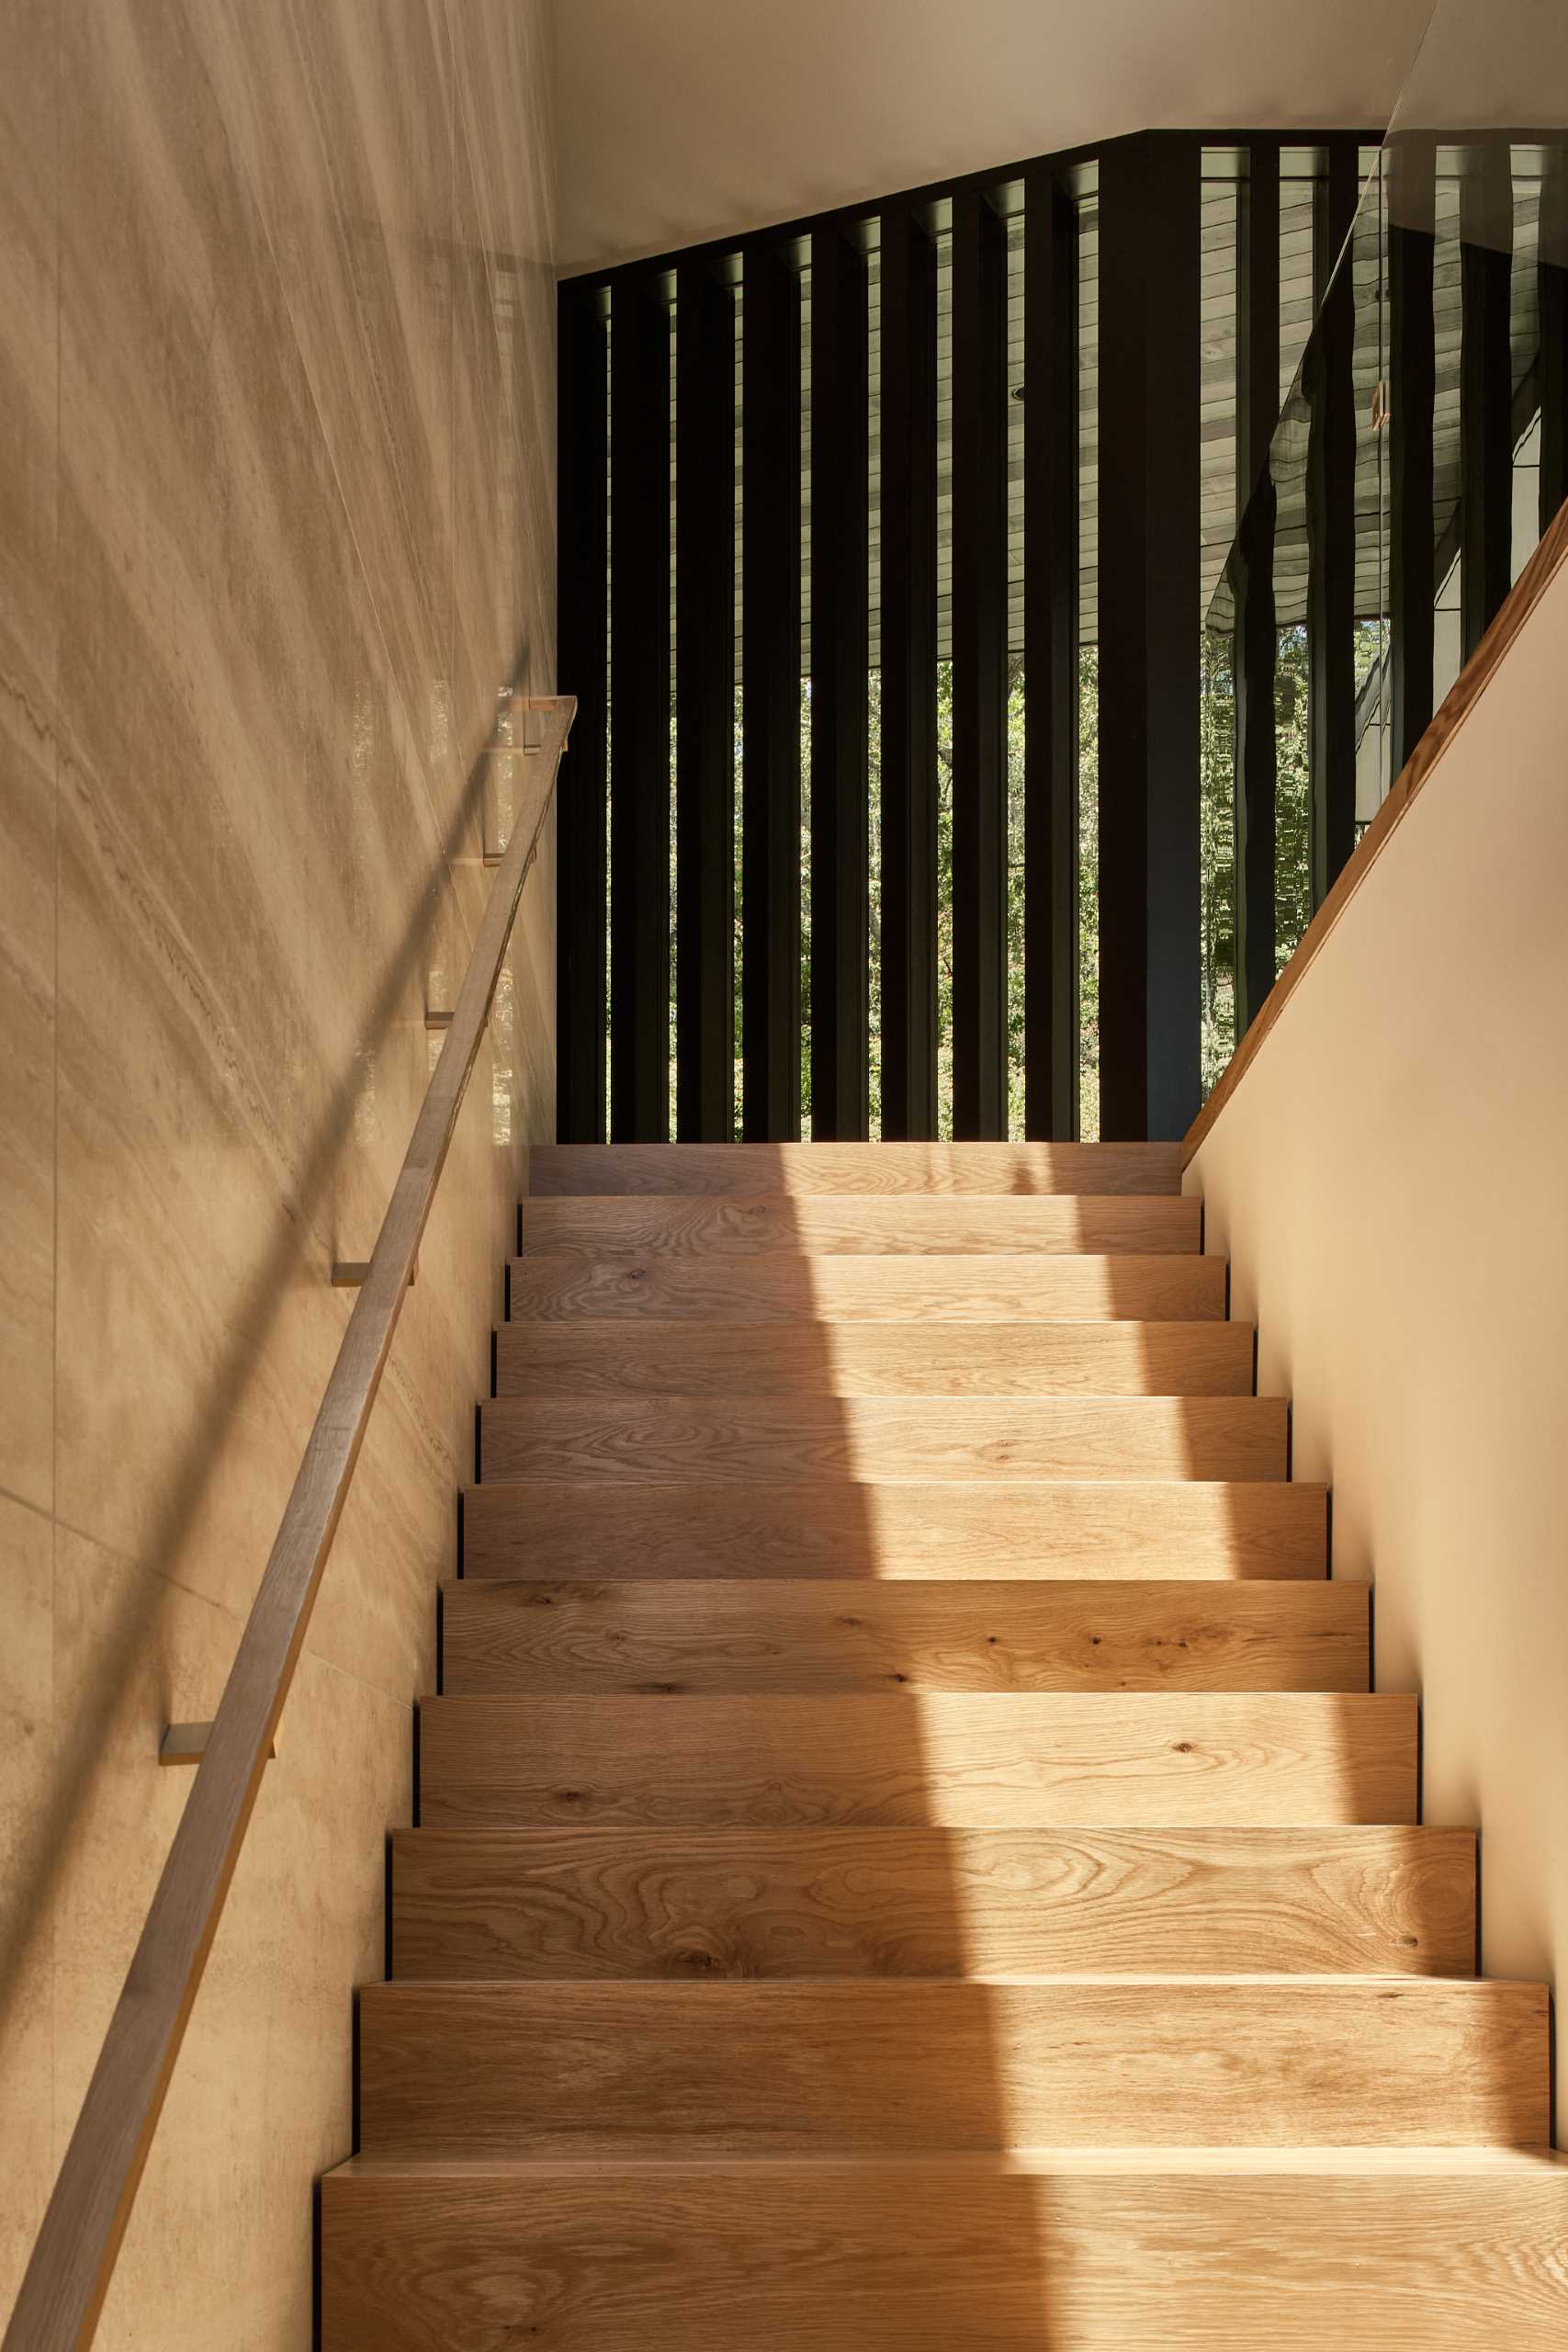 A Travertine wall runs alongside wood stairs that lead to the upper level of the home.